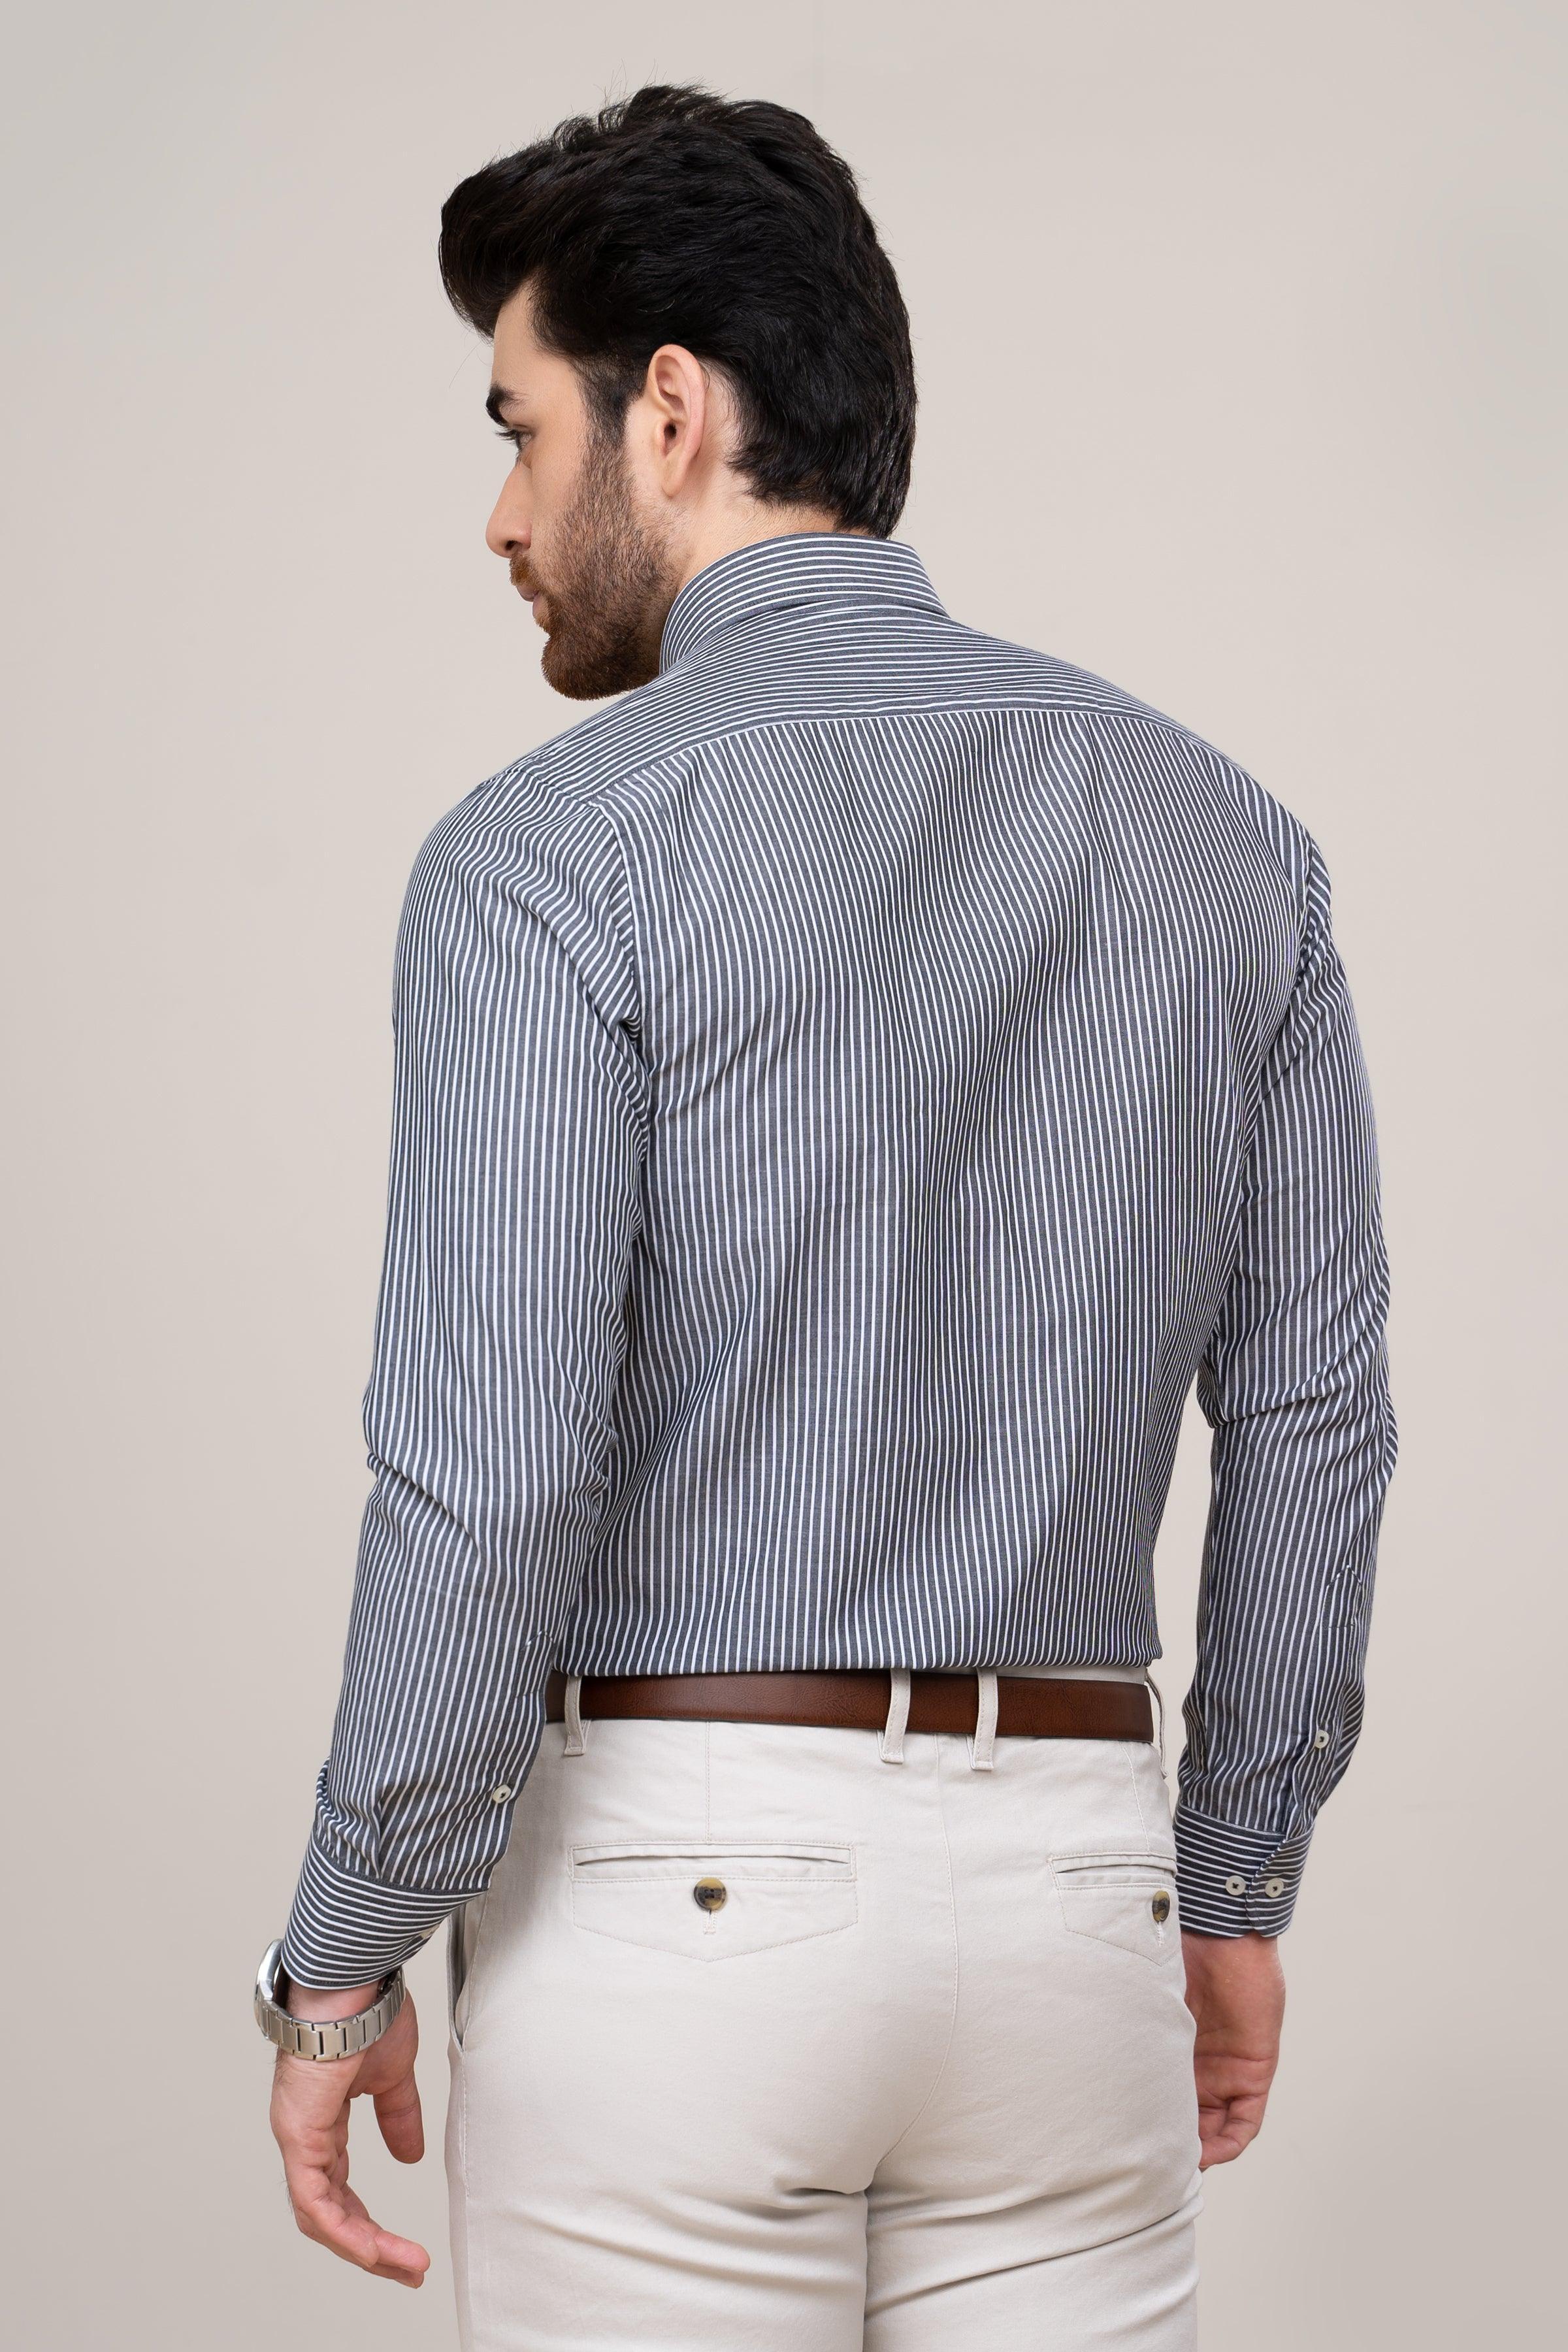 SEMI FORMAL SHIRT BLUE WHITE LINE at Charcoal Clothing